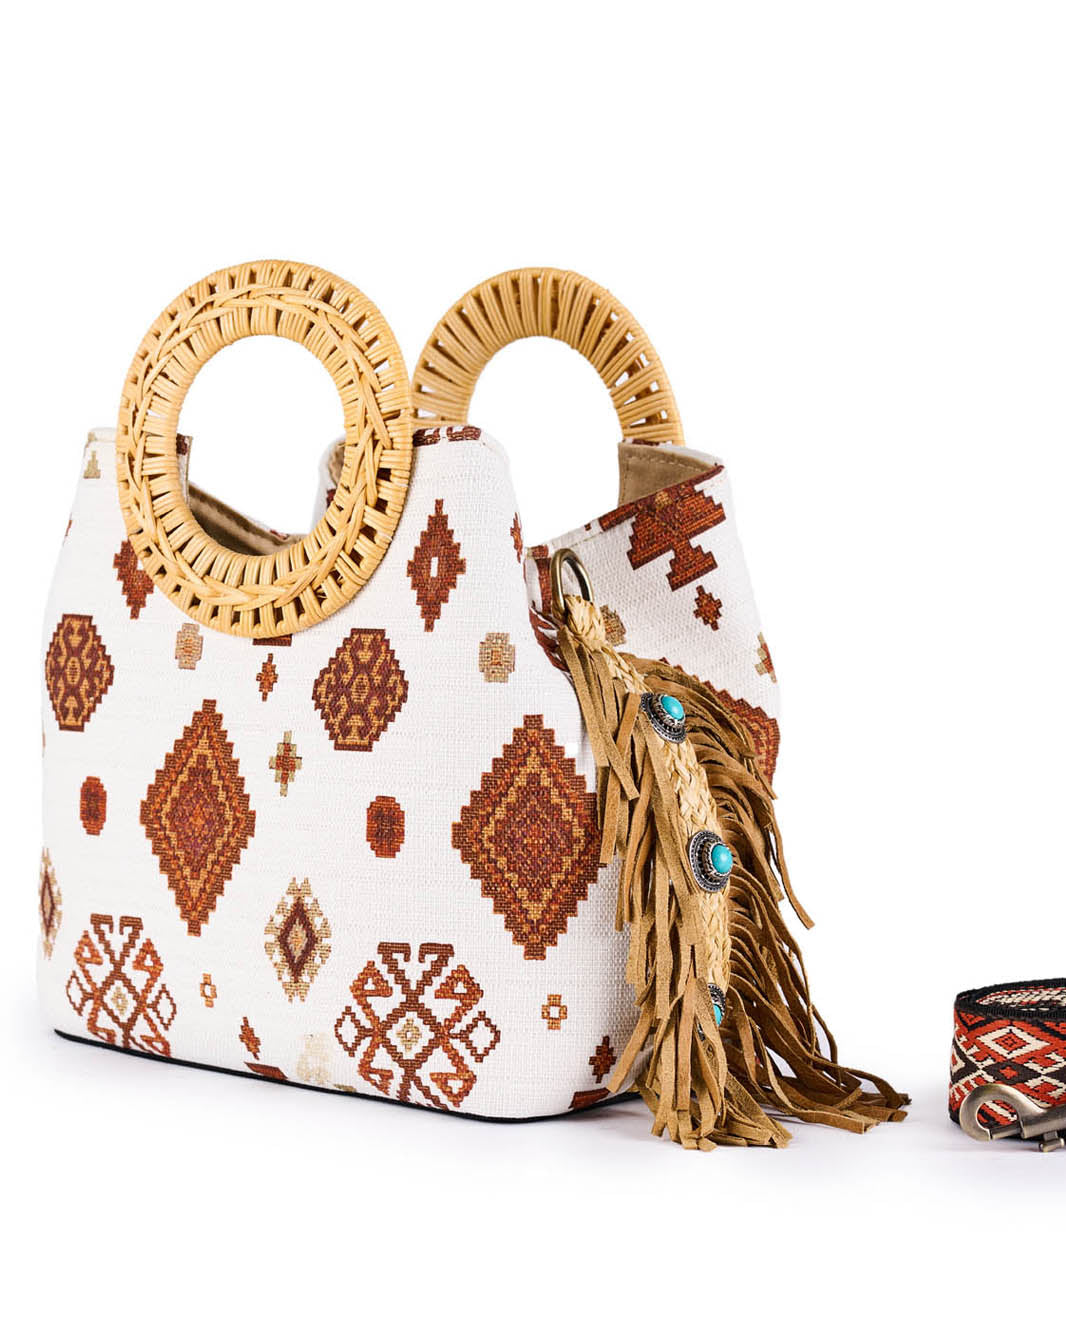 Bohemian-style handbag with tribal patterns and wooden handles